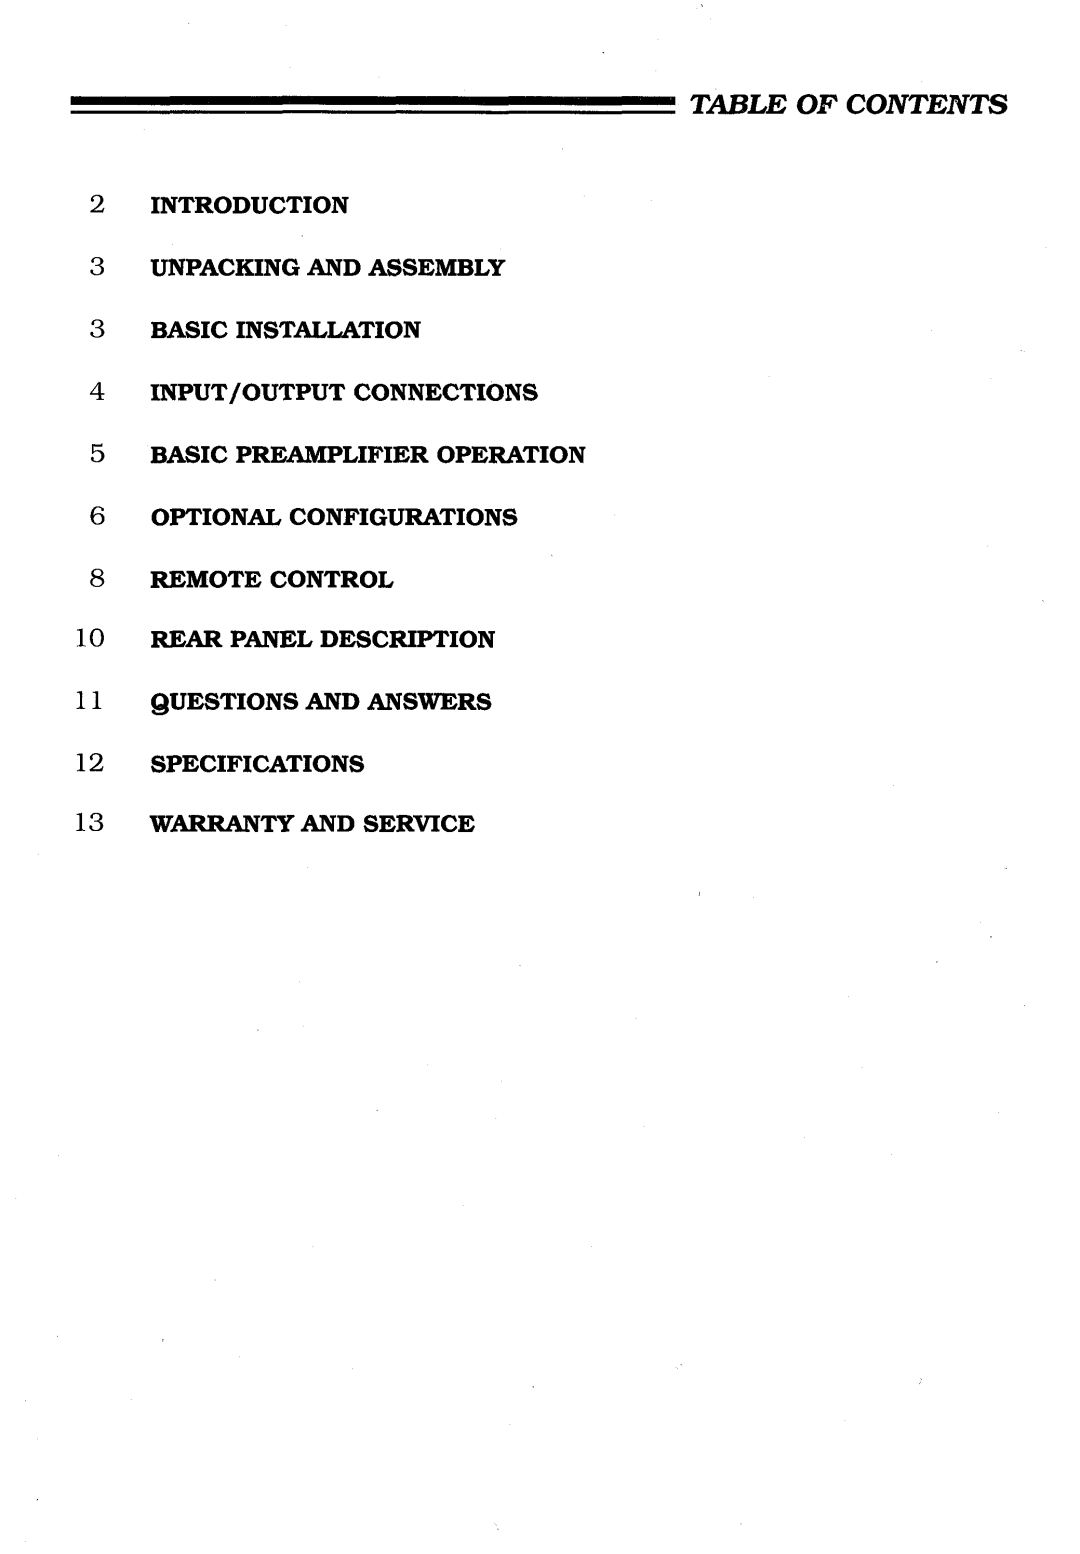 Krell Industries KRC-3 manual Table Of Contents, 2INTRODUCTION 3UNPACKING AND ASSEMBLY, 5BASIC PREAMPLIFIER OPERATION 